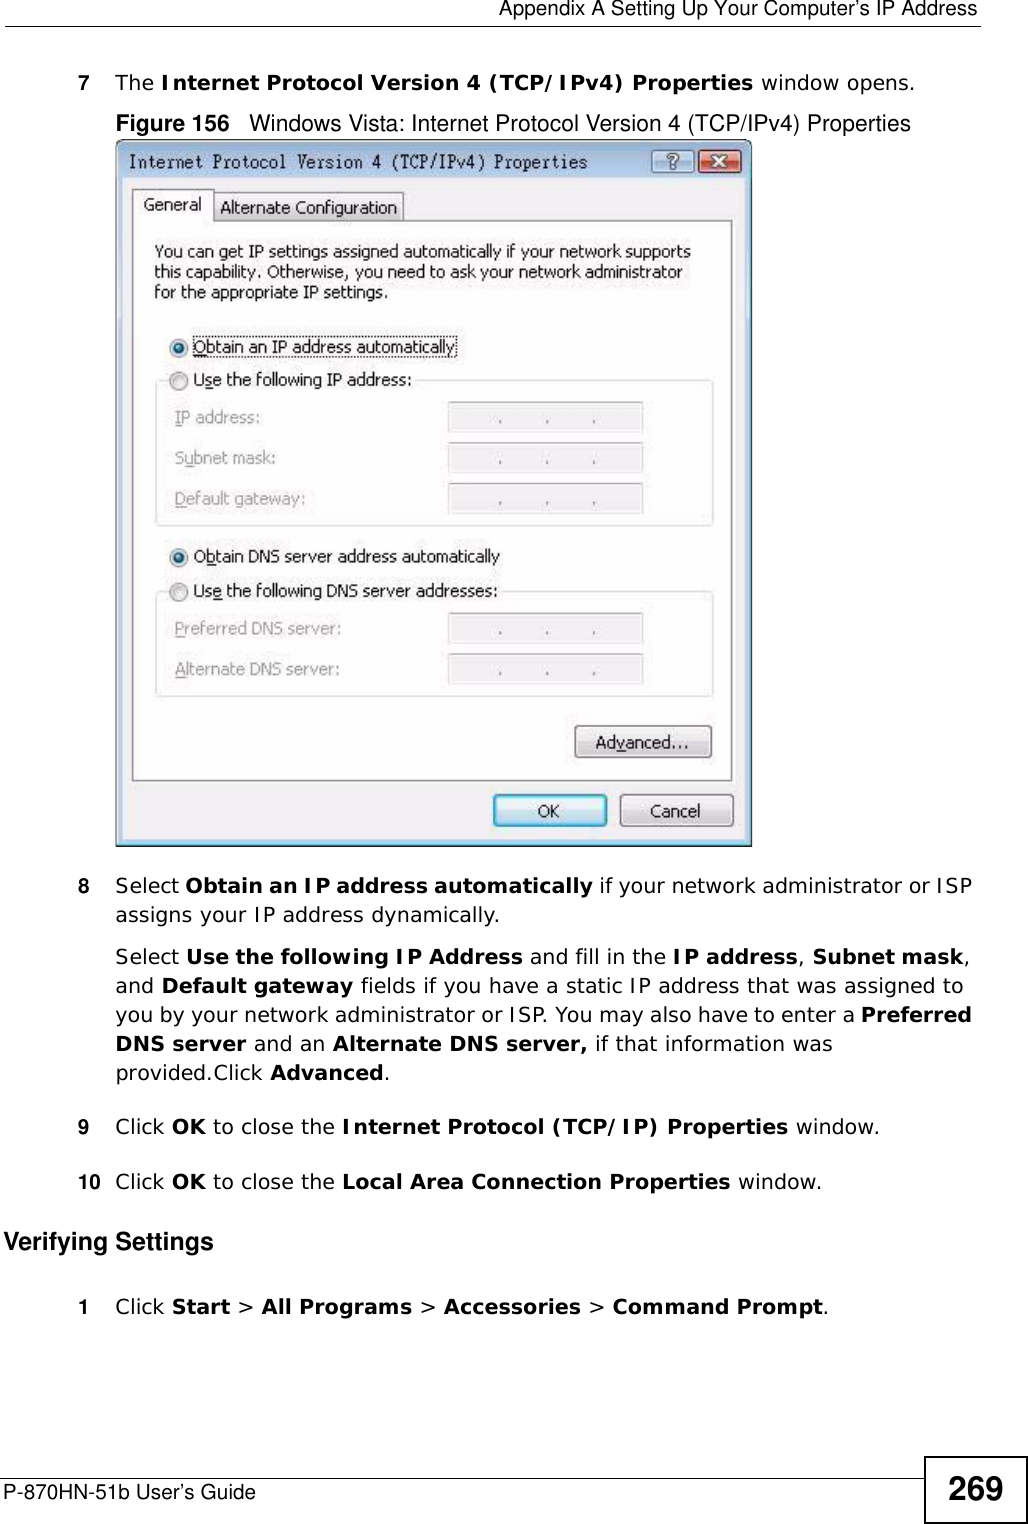  Appendix A Setting Up Your Computer’s IP AddressP-870HN-51b User’s Guide 2697The Internet Protocol Version 4 (TCP/IPv4) Properties window opens.Figure 156   Windows Vista: Internet Protocol Version 4 (TCP/IPv4) Properties8Select Obtain an IP address automatically if your network administrator or ISP assigns your IP address dynamically.Select Use the following IP Address and fill in the IP address, Subnet mask, and Default gateway fields if you have a static IP address that was assigned to you by your network administrator or ISP. You may also have to enter a Preferred DNS server and an Alternate DNS server, if that information was provided.Click Advanced.9Click OK to close the Internet Protocol (TCP/IP) Properties window.10 Click OK to close the Local Area Connection Properties window.Verifying Settings1Click Start &gt; All Programs &gt; Accessories &gt; Command Prompt.